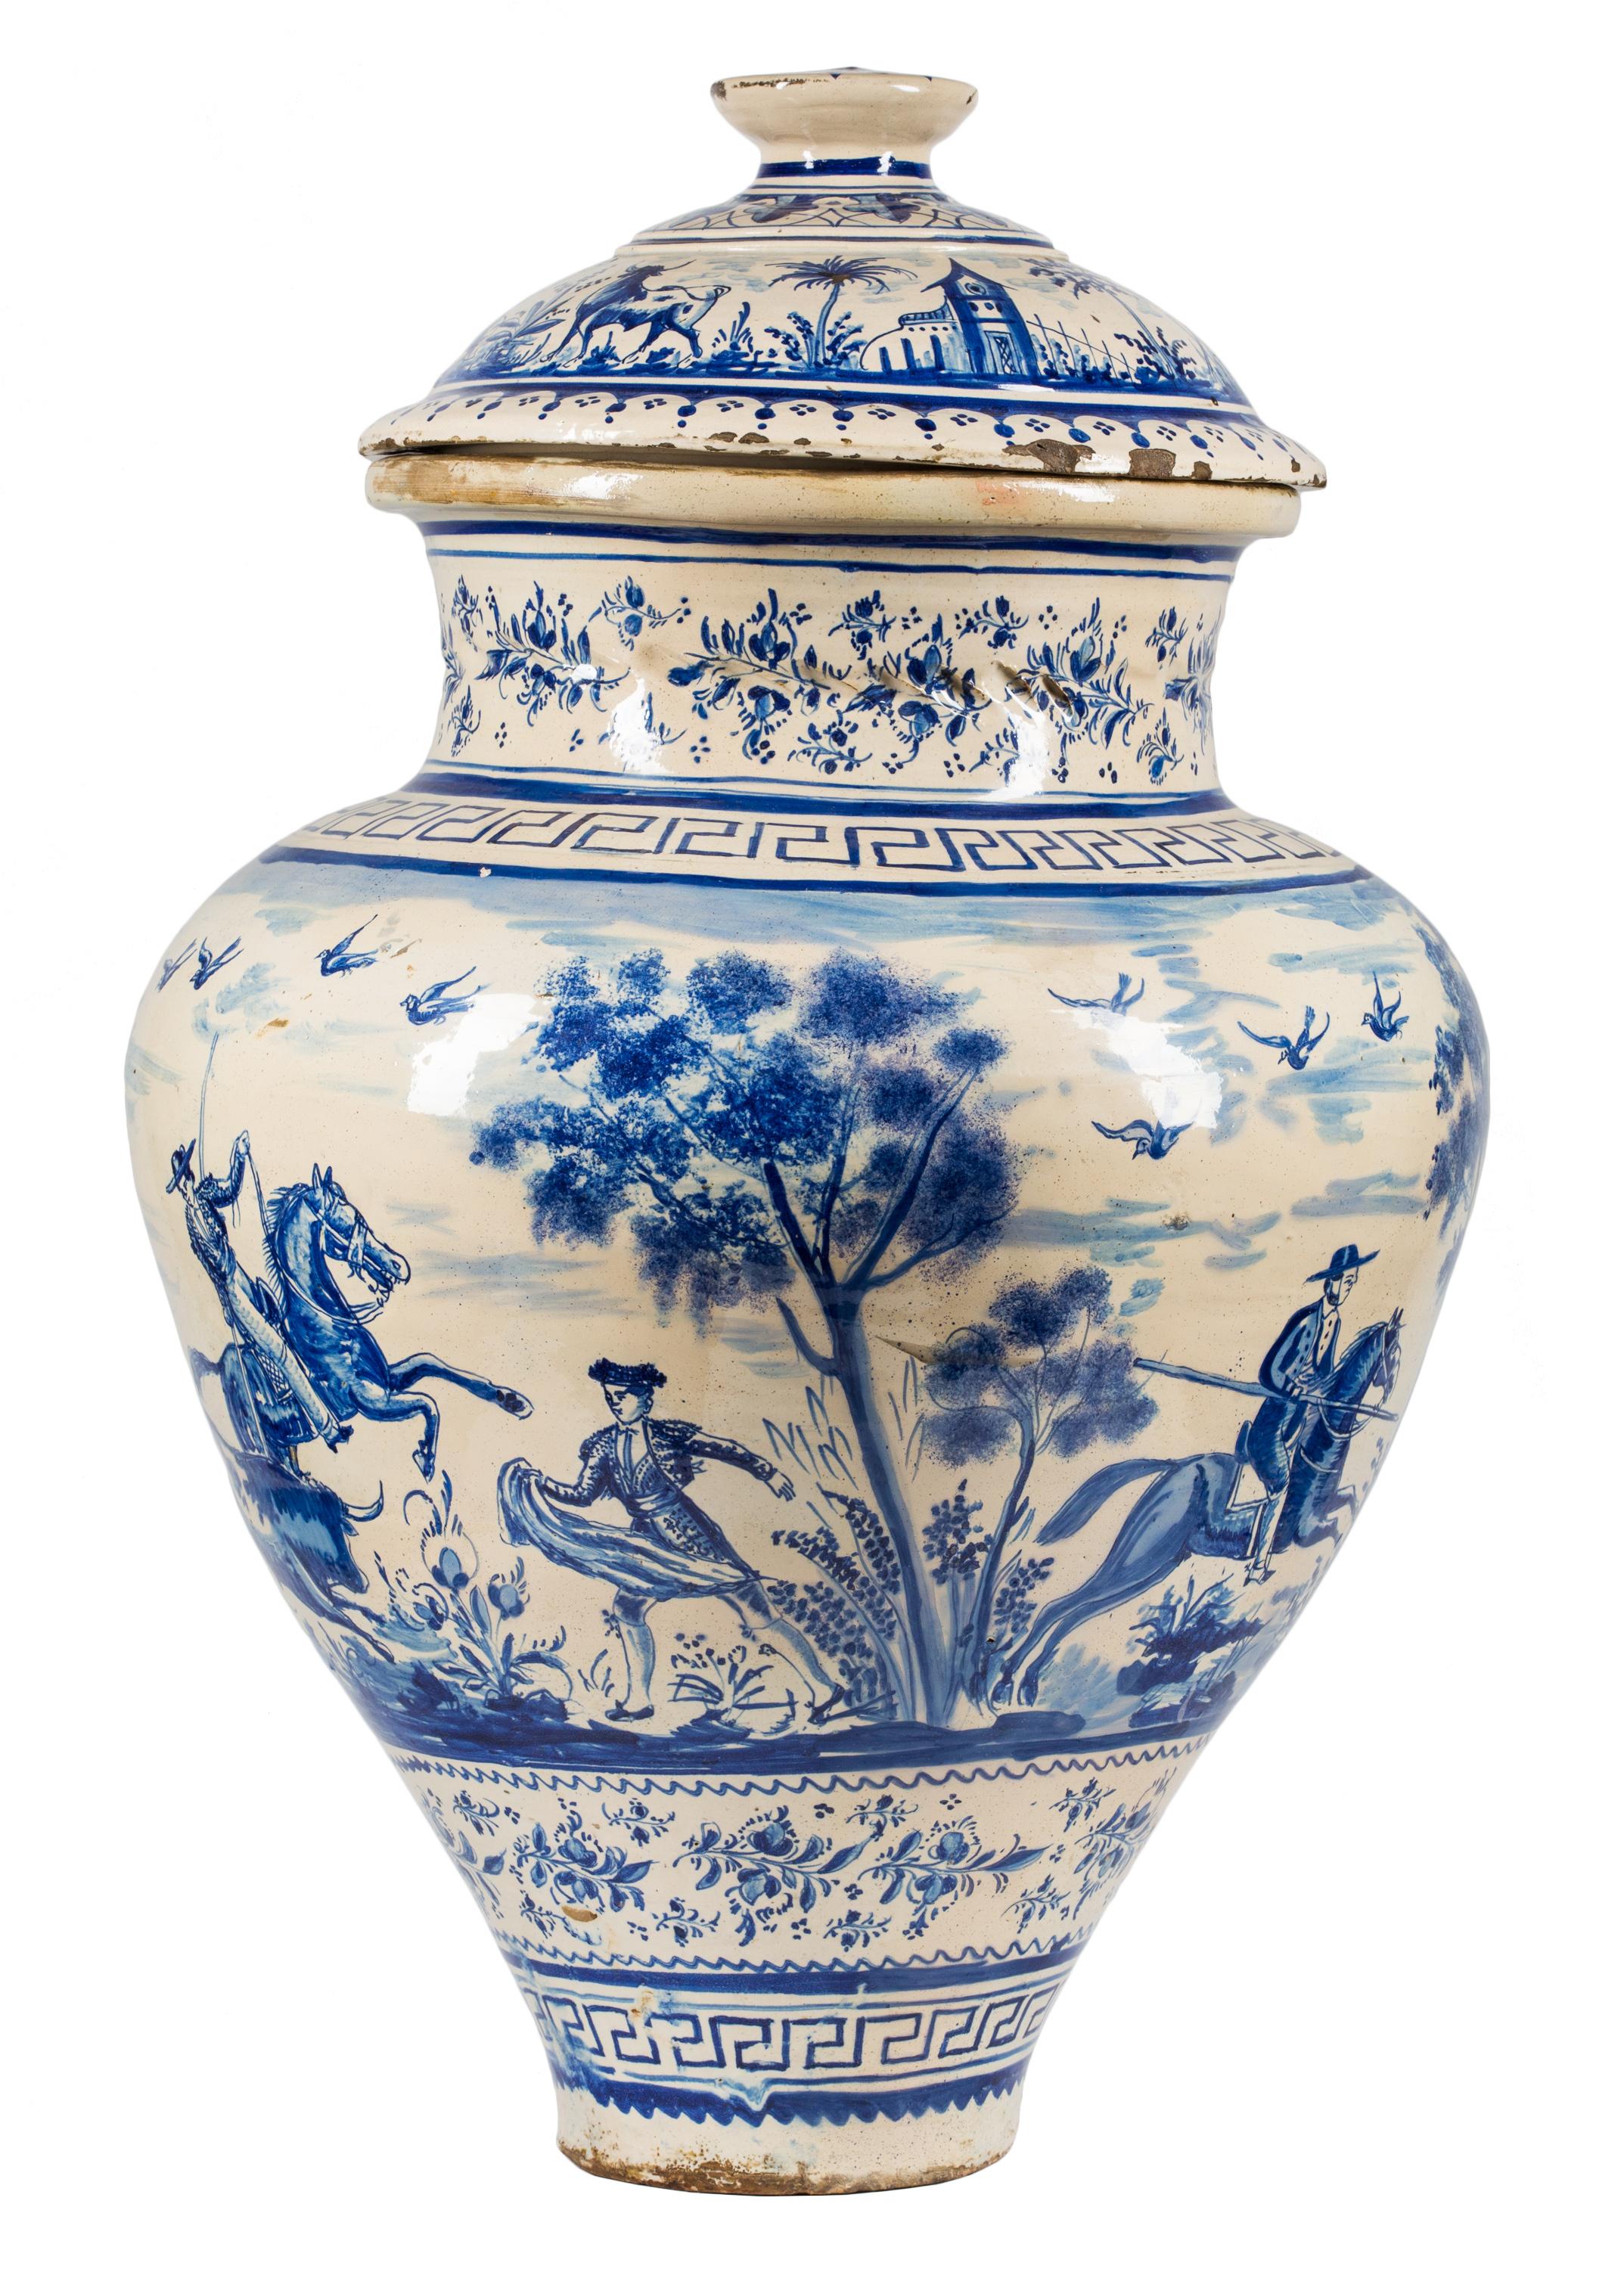 A large (80cm H) 19th century ceramic jar with lid made in the Triana district of Seville, Spain. It is hand painted in cobalt blue glaze over a milk white tin slip in montería (hunting) style, with bulls, mounted picadors and a hunter with rifle in